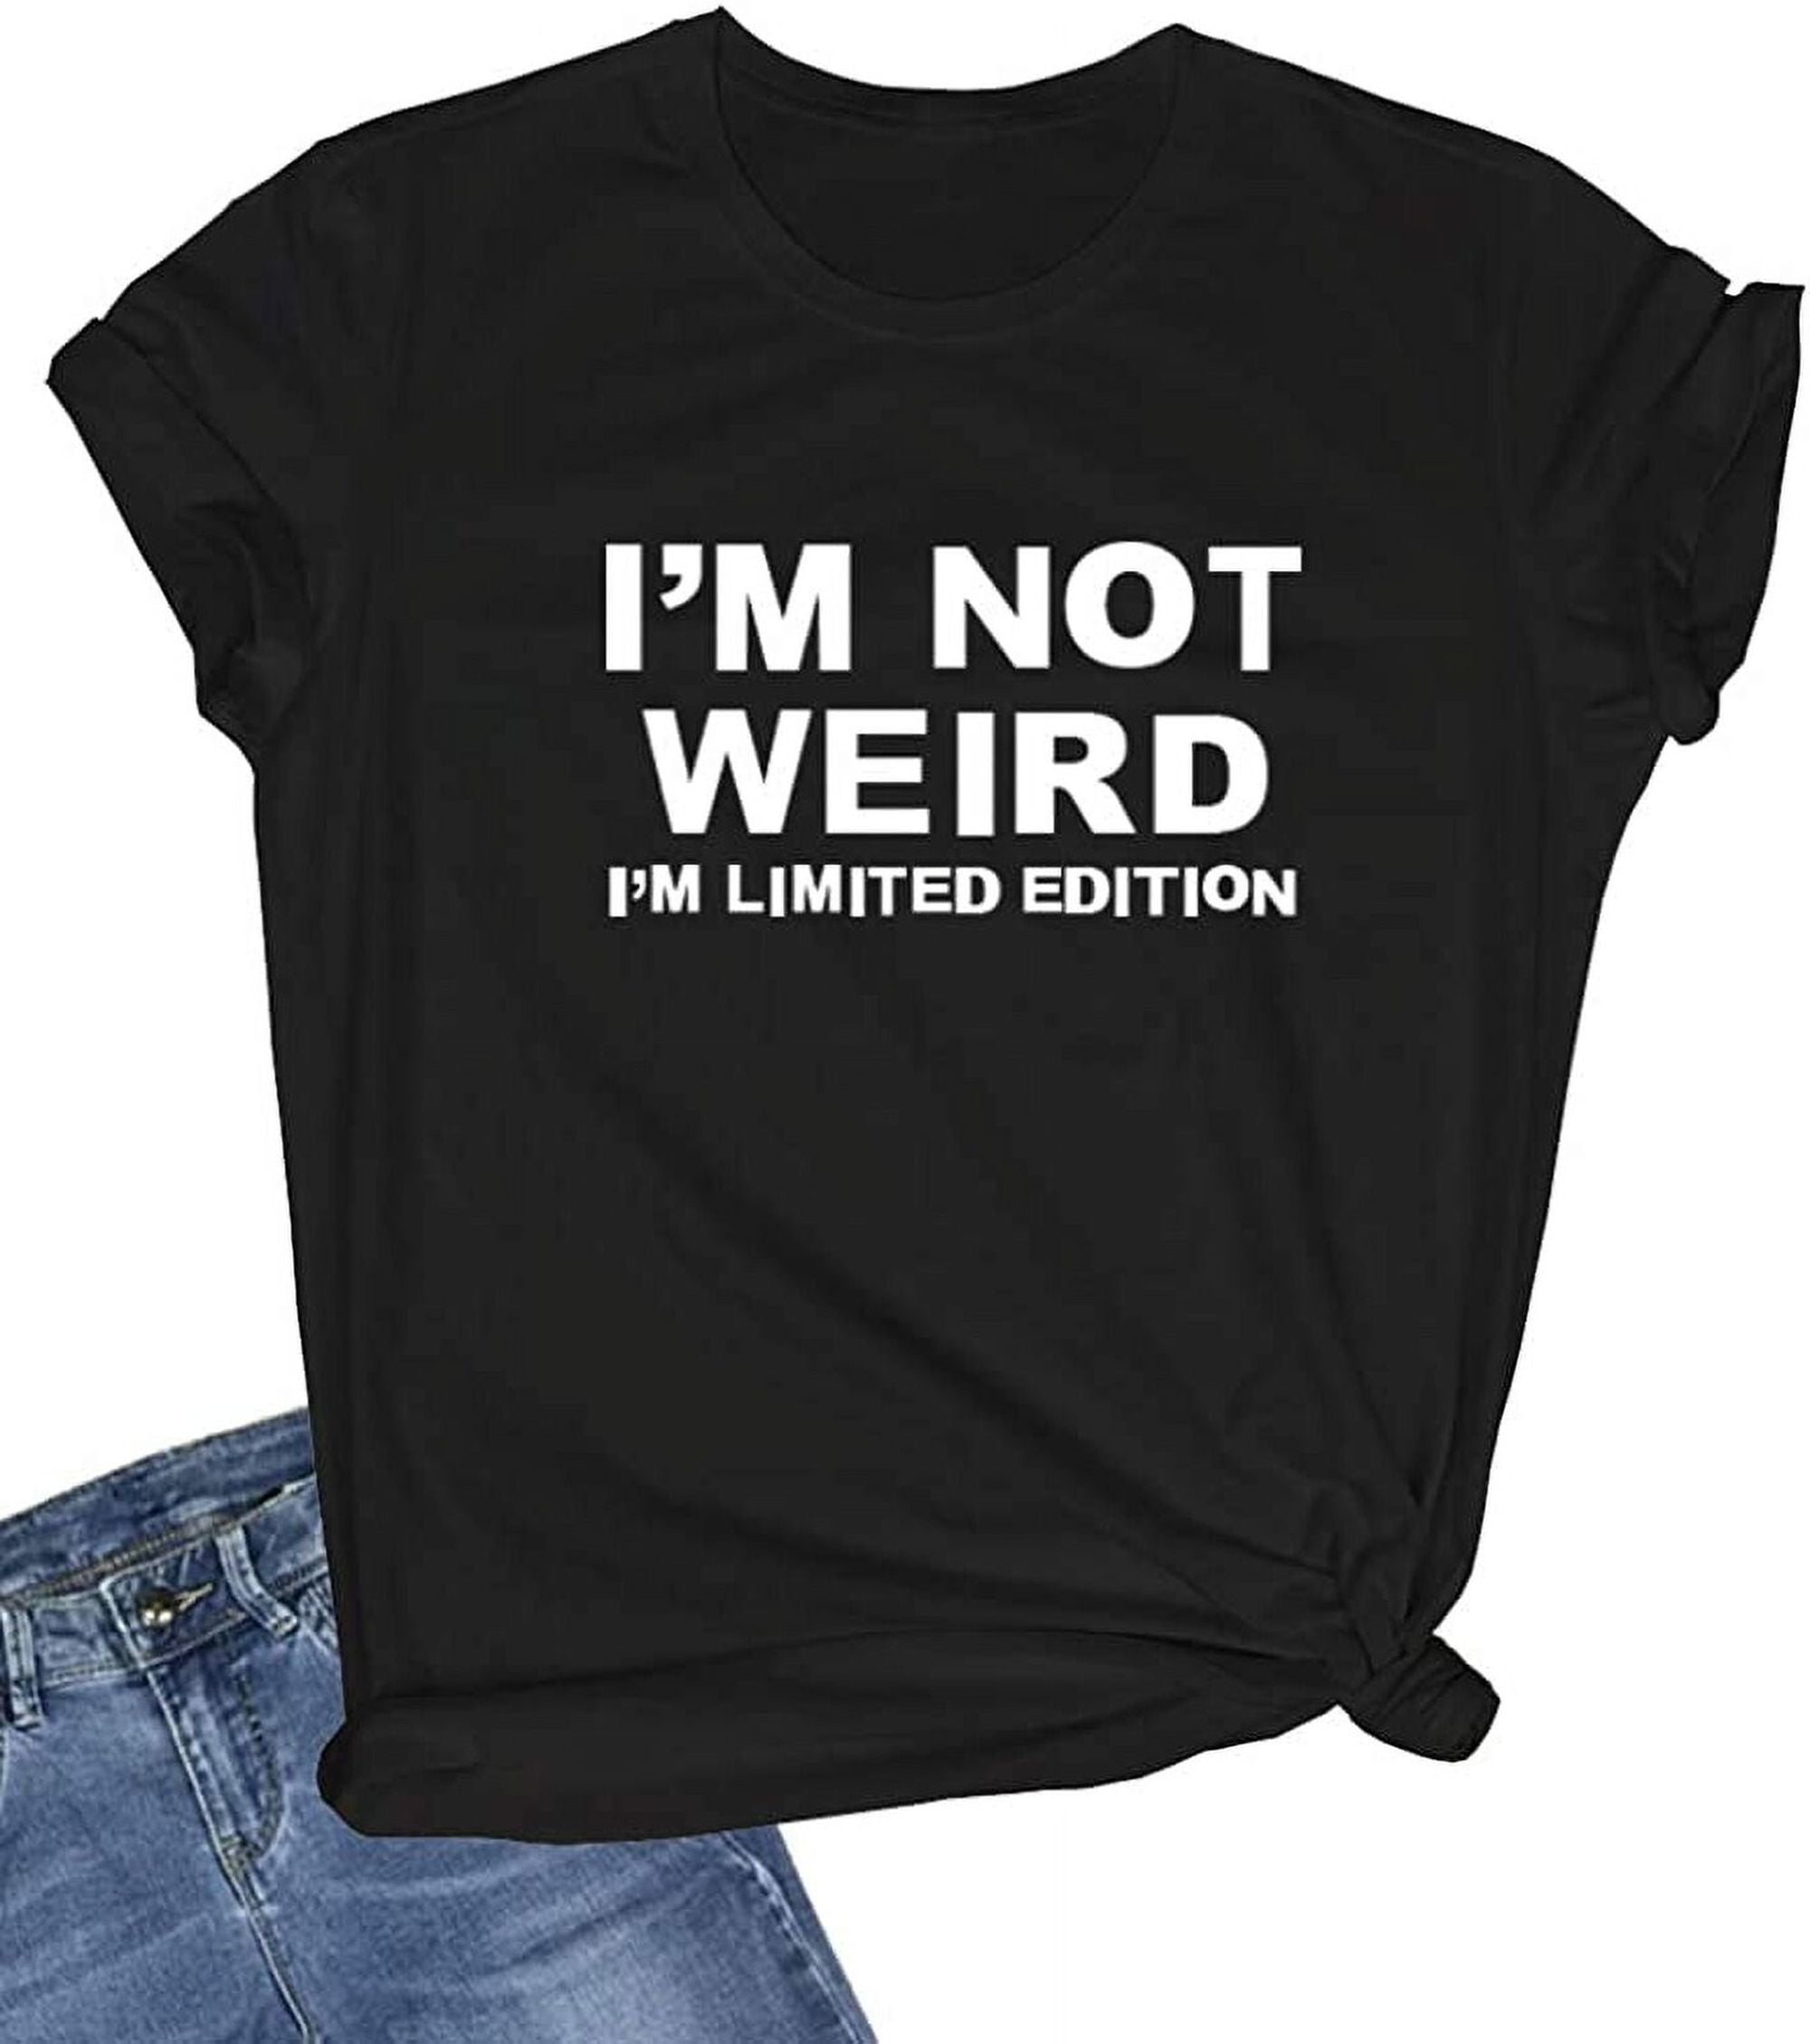 Adorable Graphic Tees for Trendy Teens: Explore Our Collection of Women ...